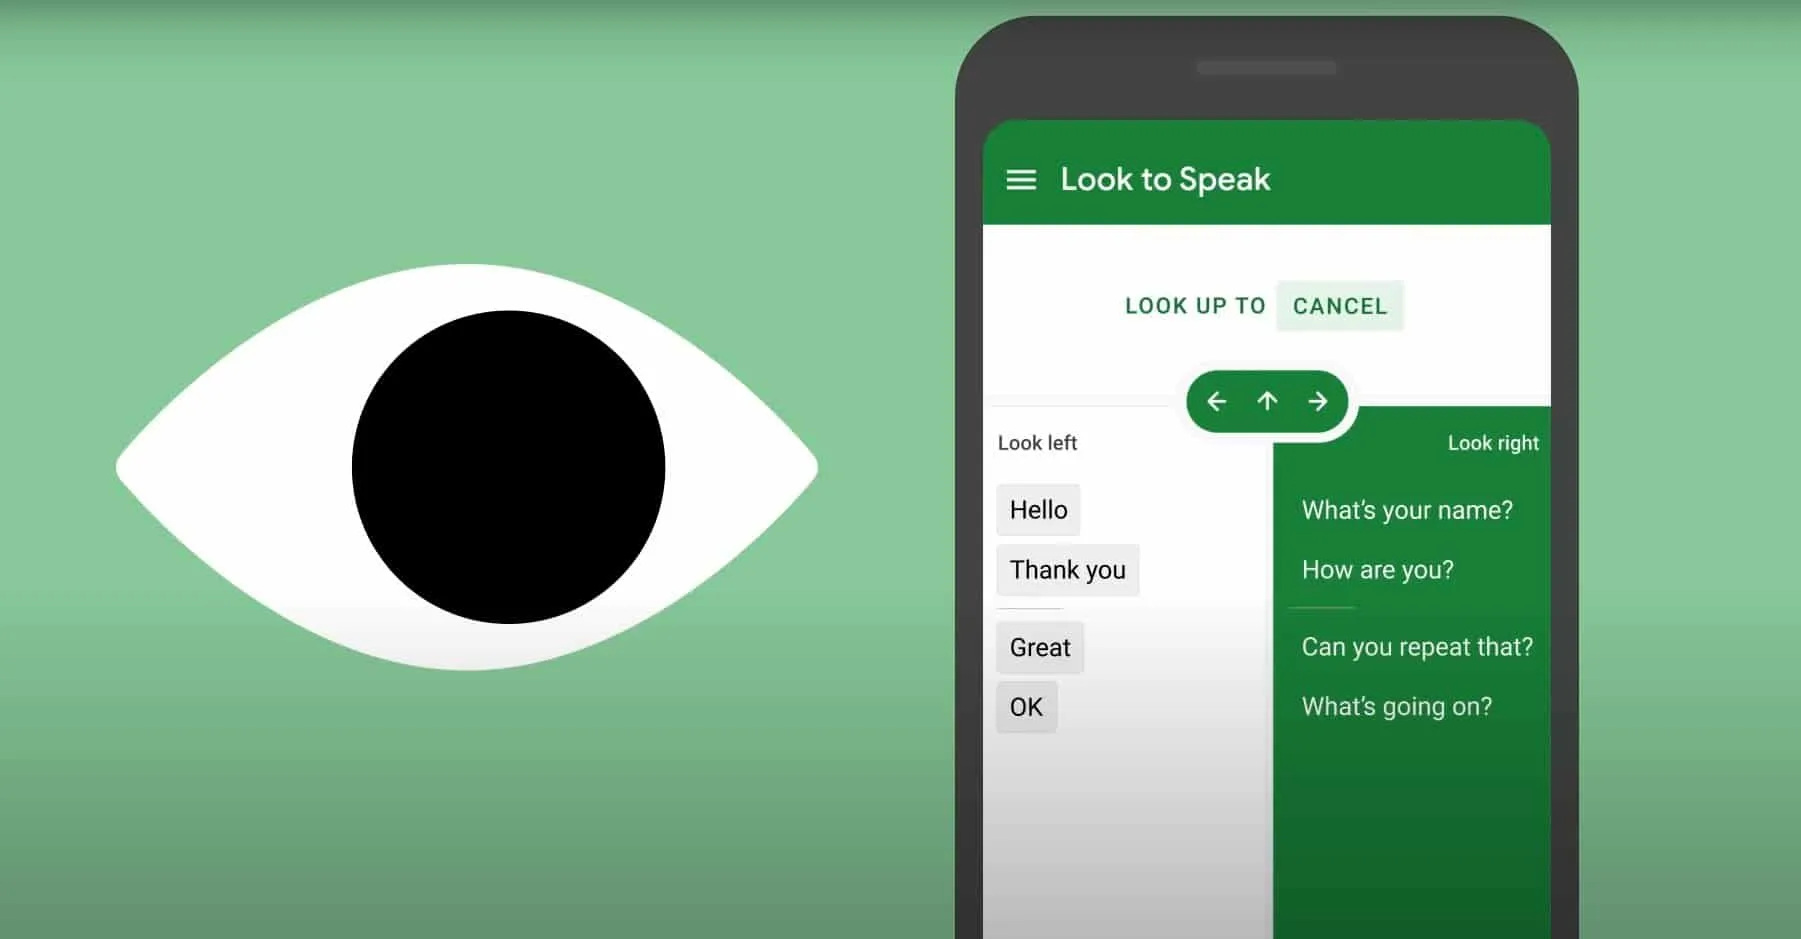 How To Control Android With Eyes Using Google ‘Look To Speak’?